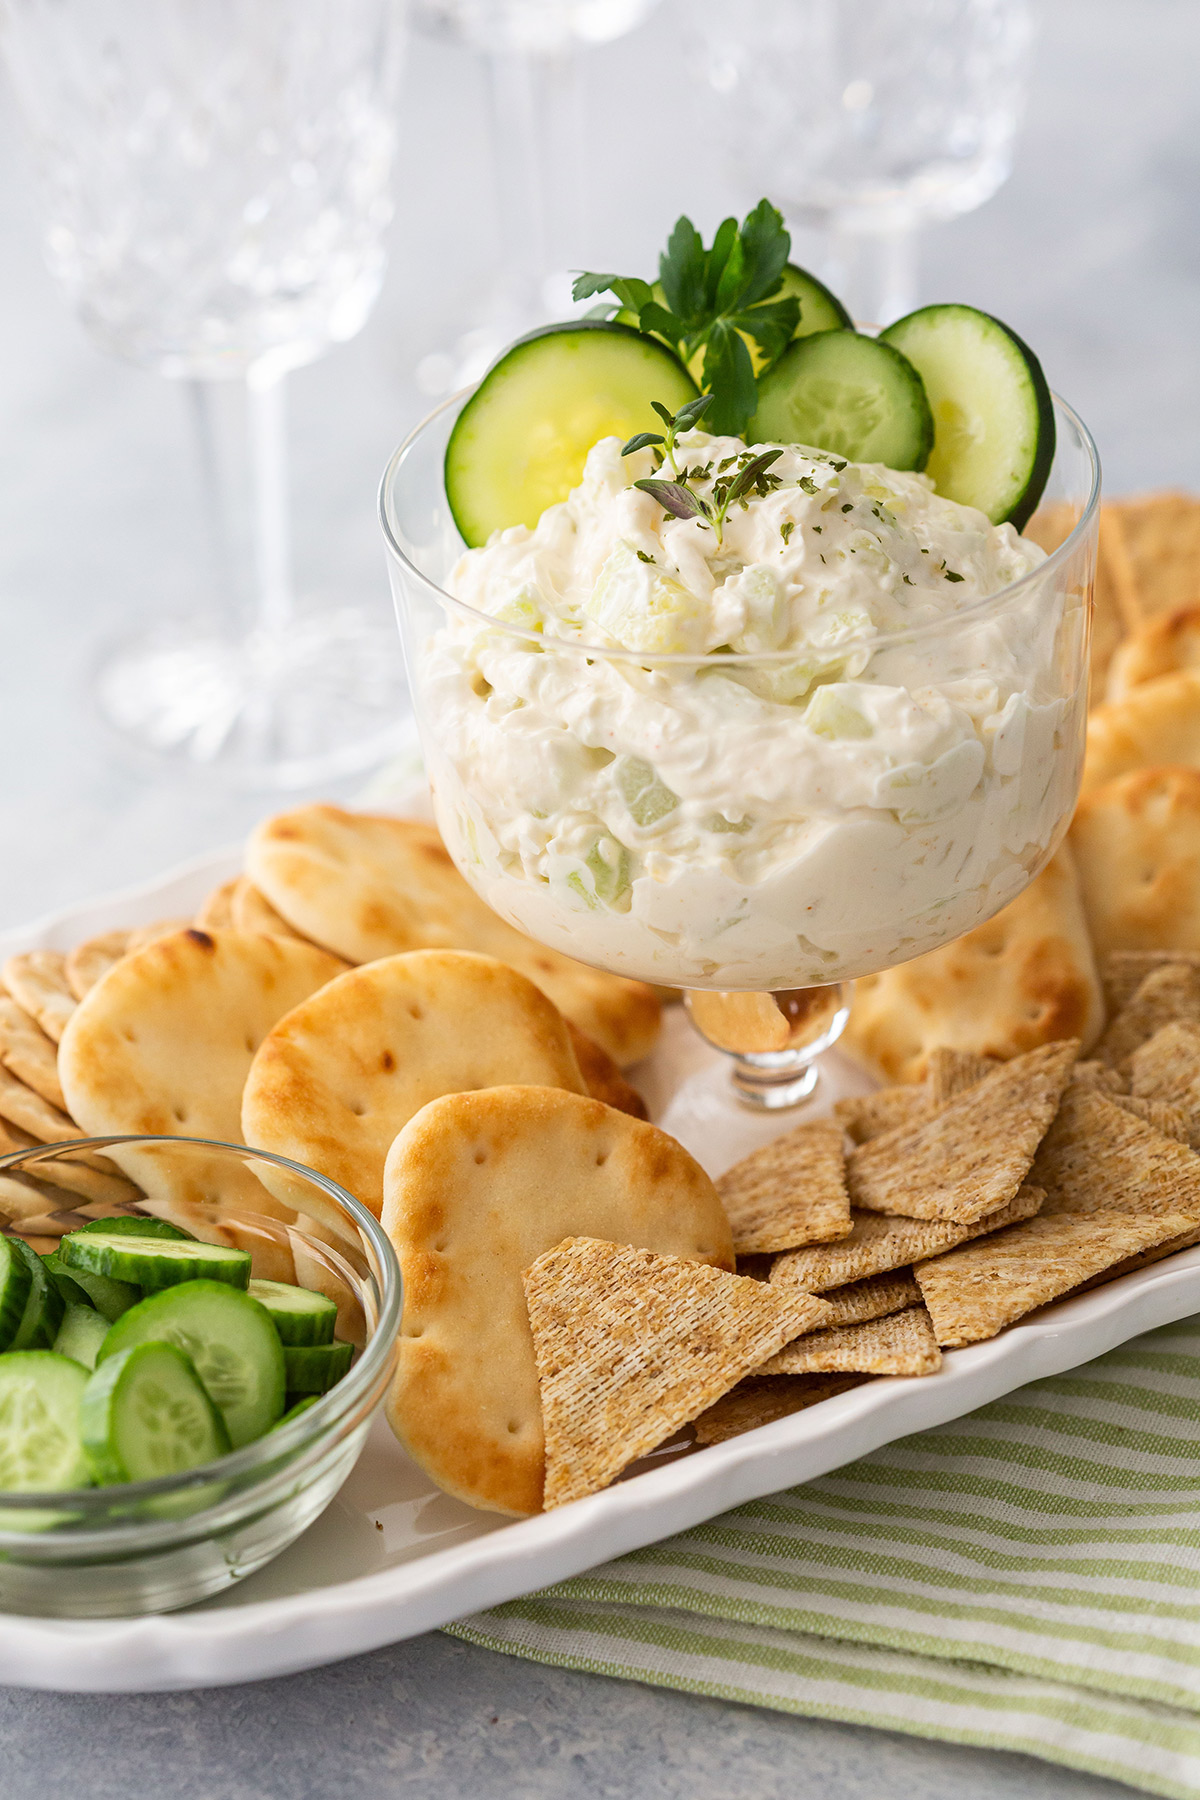 Cucumber with Cream Cheese Dip